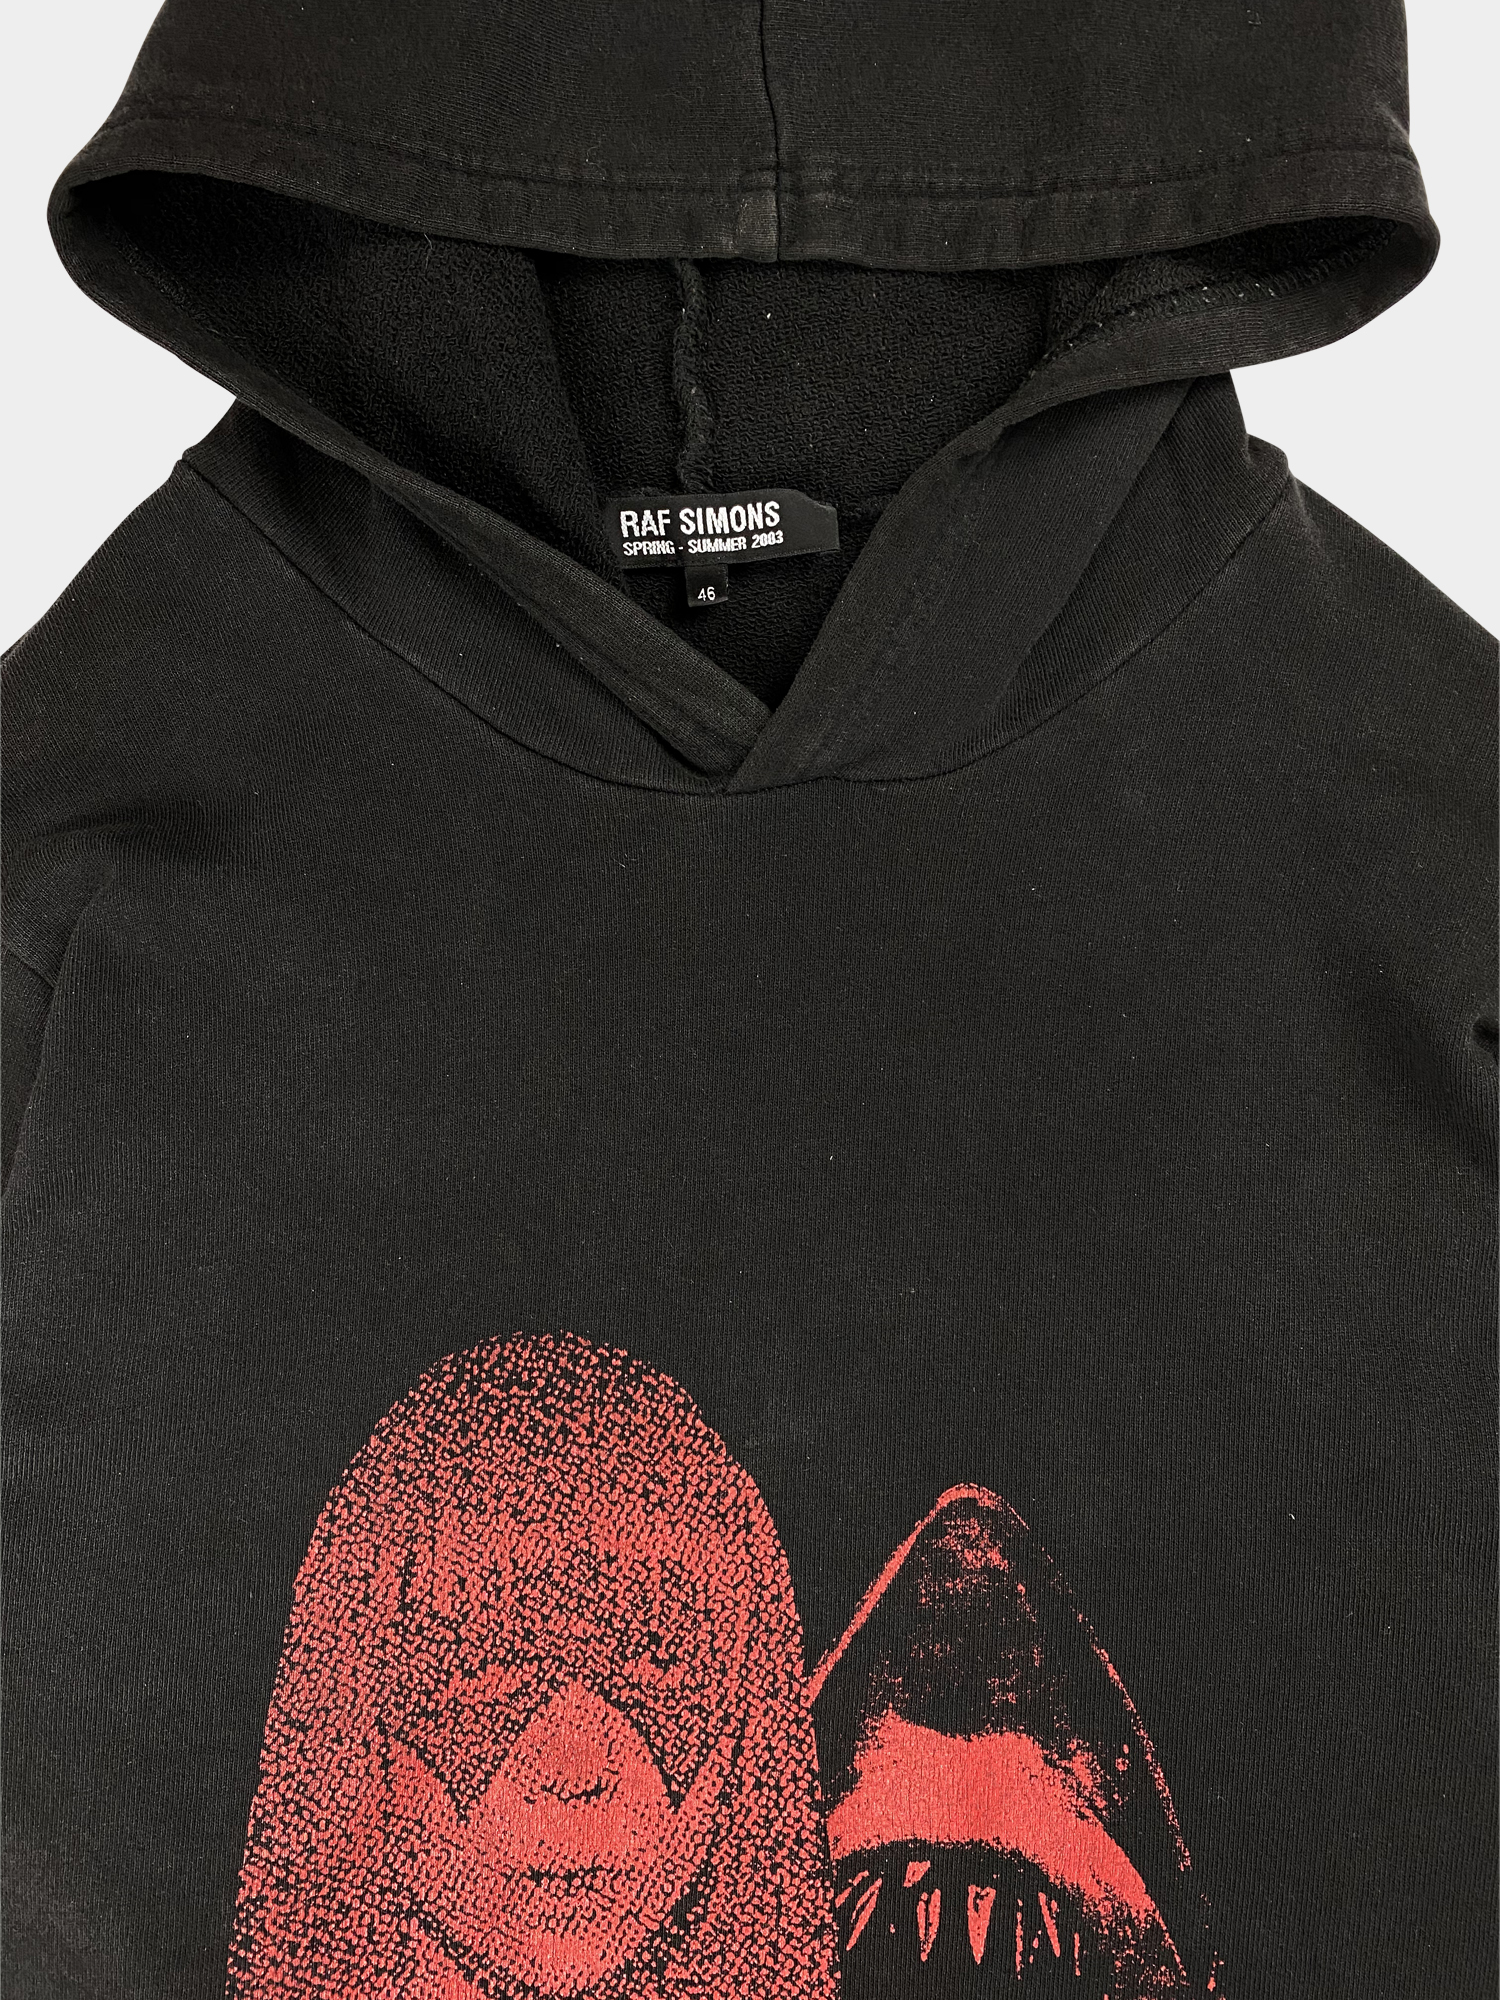 RAF SIMONS Penelope Hoodie - ARCHIVED